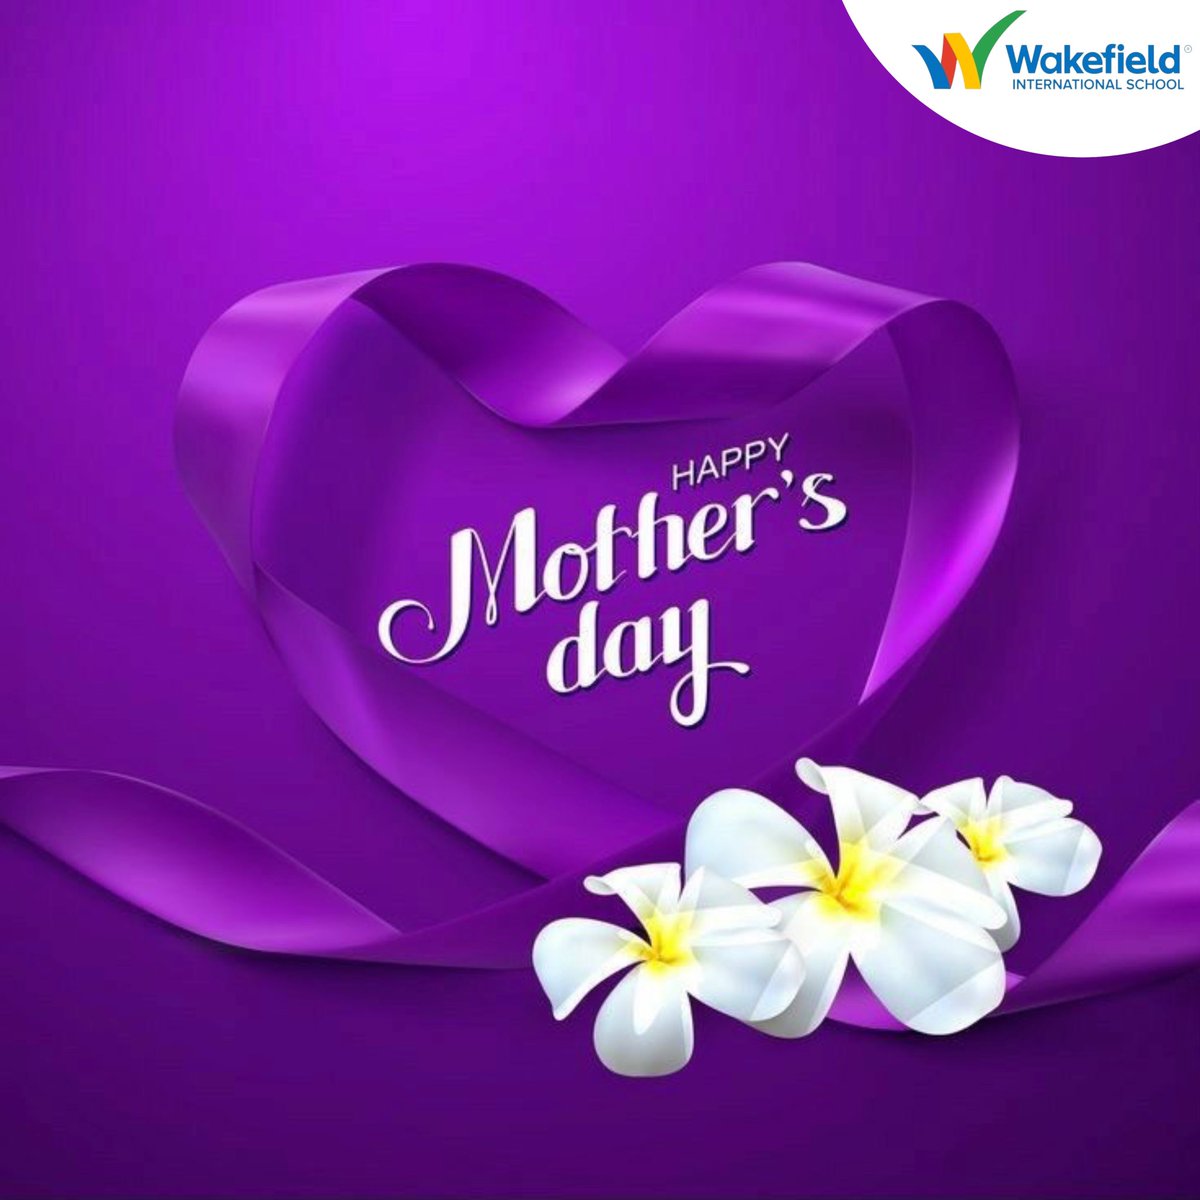 Happy Mother’s Day from all of us at Wakefield International School.
#WISIn2024 #WakefieldInternational   #WakefieldEducation #Wakefield #BestEducation #QualityEducation #schoolsinLagos #BestSchoolInLagos #SchoolsinLagos #SchoolsinAmuwo-odofin #SchoolsinFestac